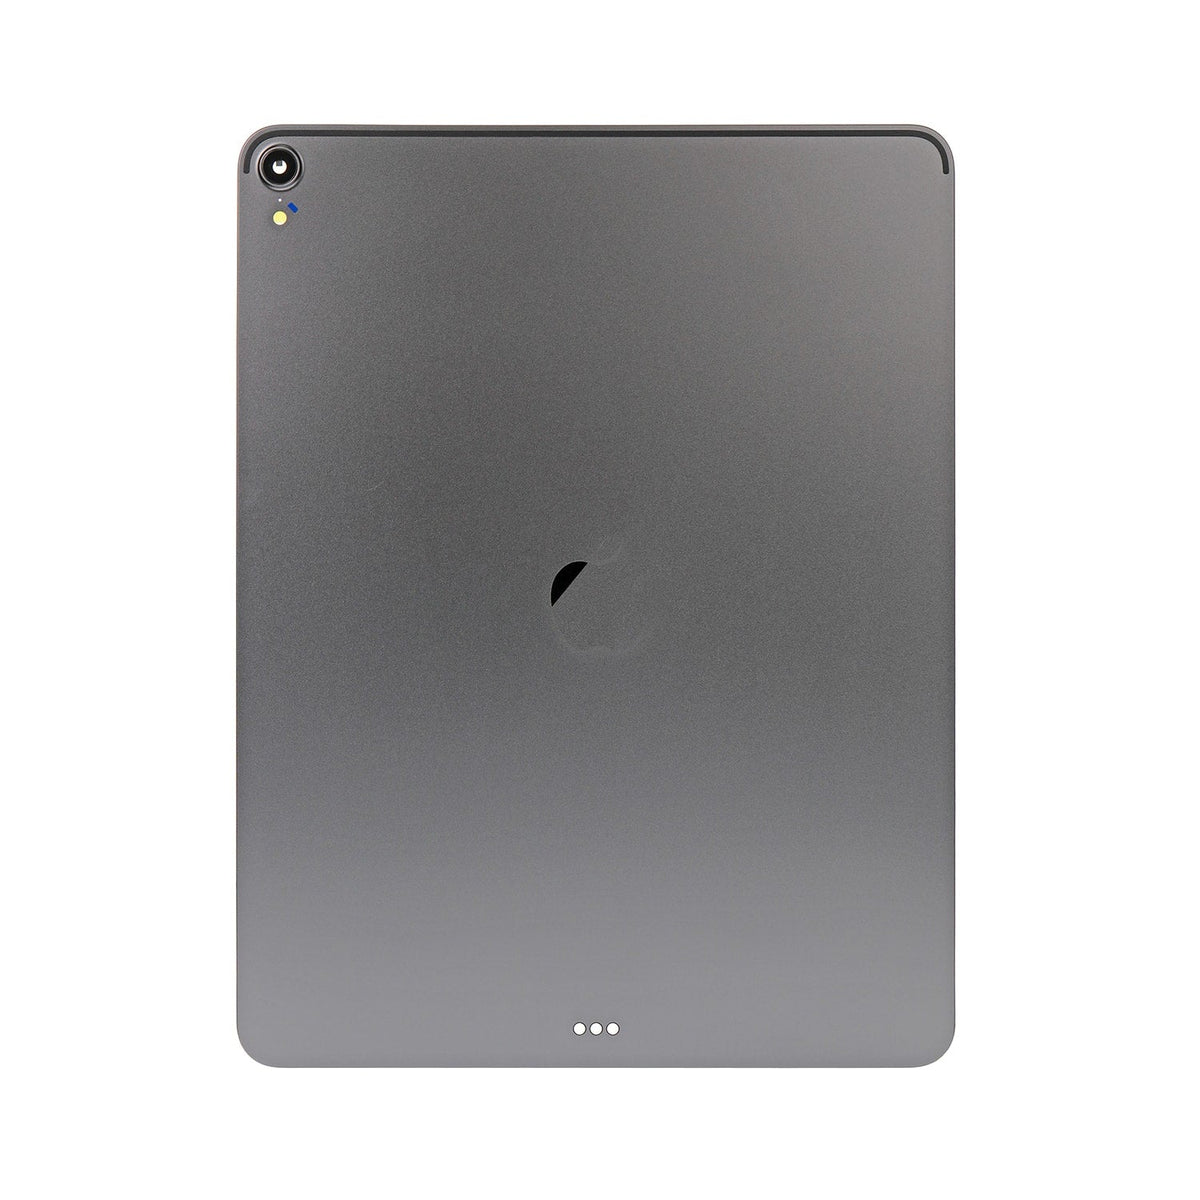 BACK COVER WIFI VERSION (GREY) FOR IPAD PRO 12.9 3RD